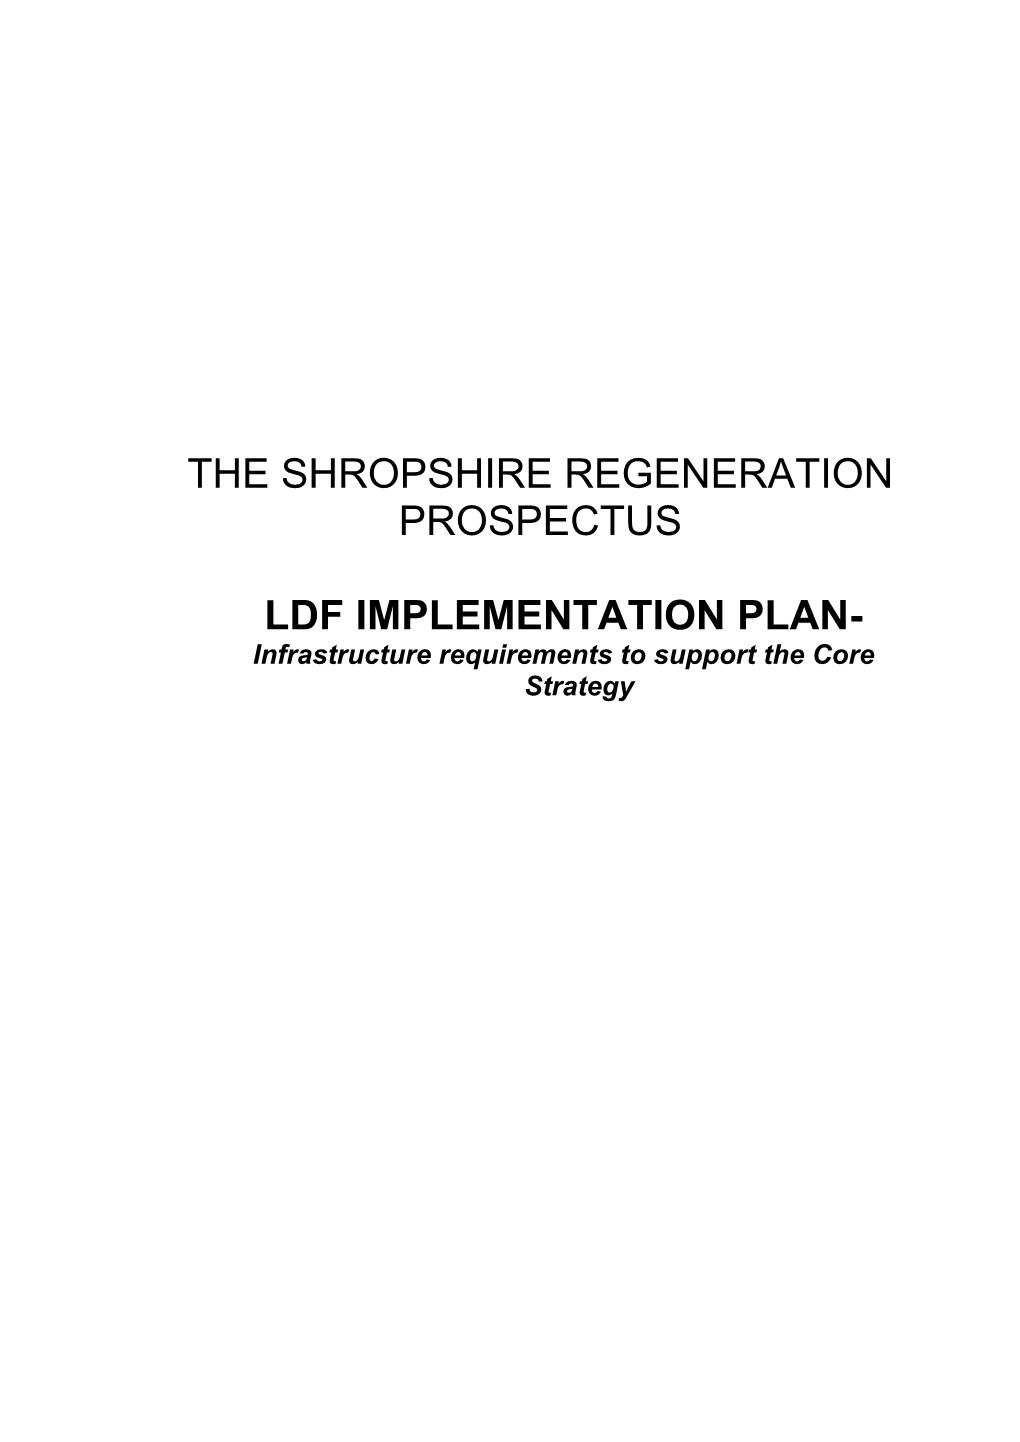 IMPLEMENTATION PLAN- Infrastructure Requirements to Support the Core Strategy